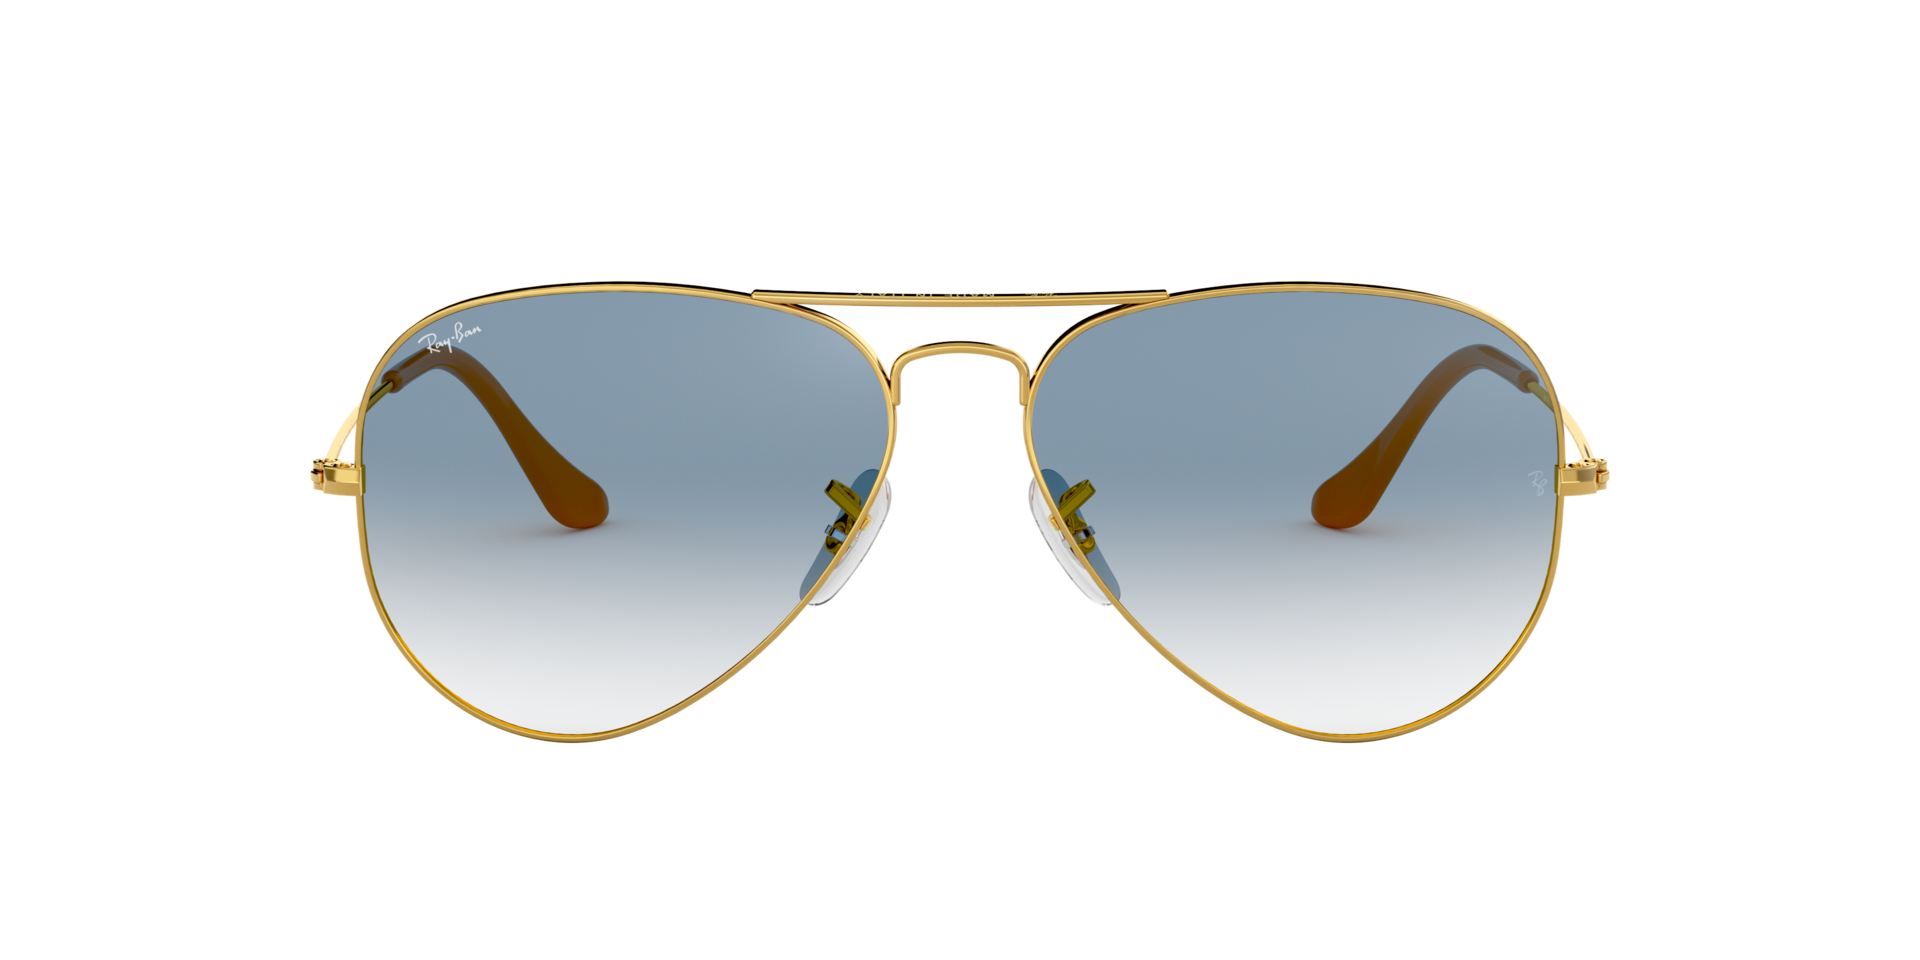 Ray Ban Aviator Large Metal Sonnenbrille RB3025 001/3F 58